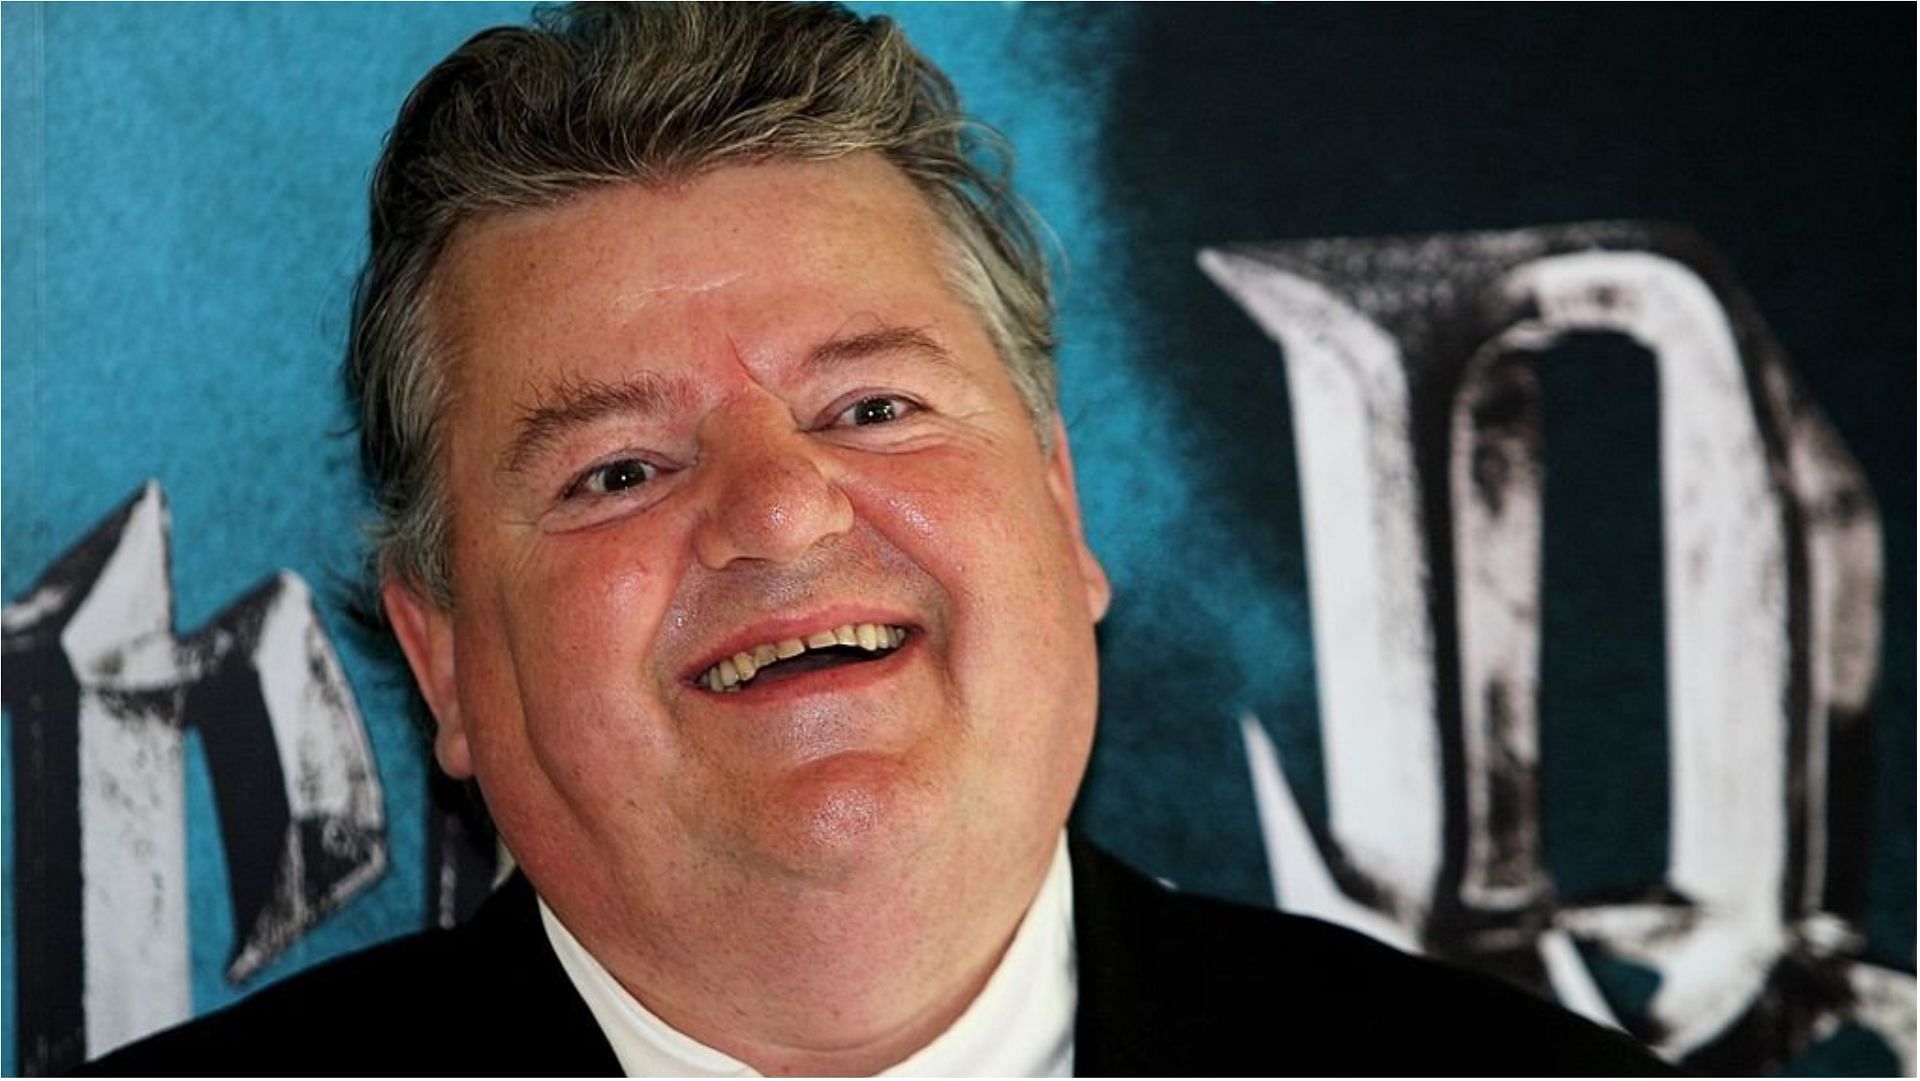 Robbie Coltrane was popular for his appearances on various movies and TV shows (Image via Dave Hogan/Getty Images)